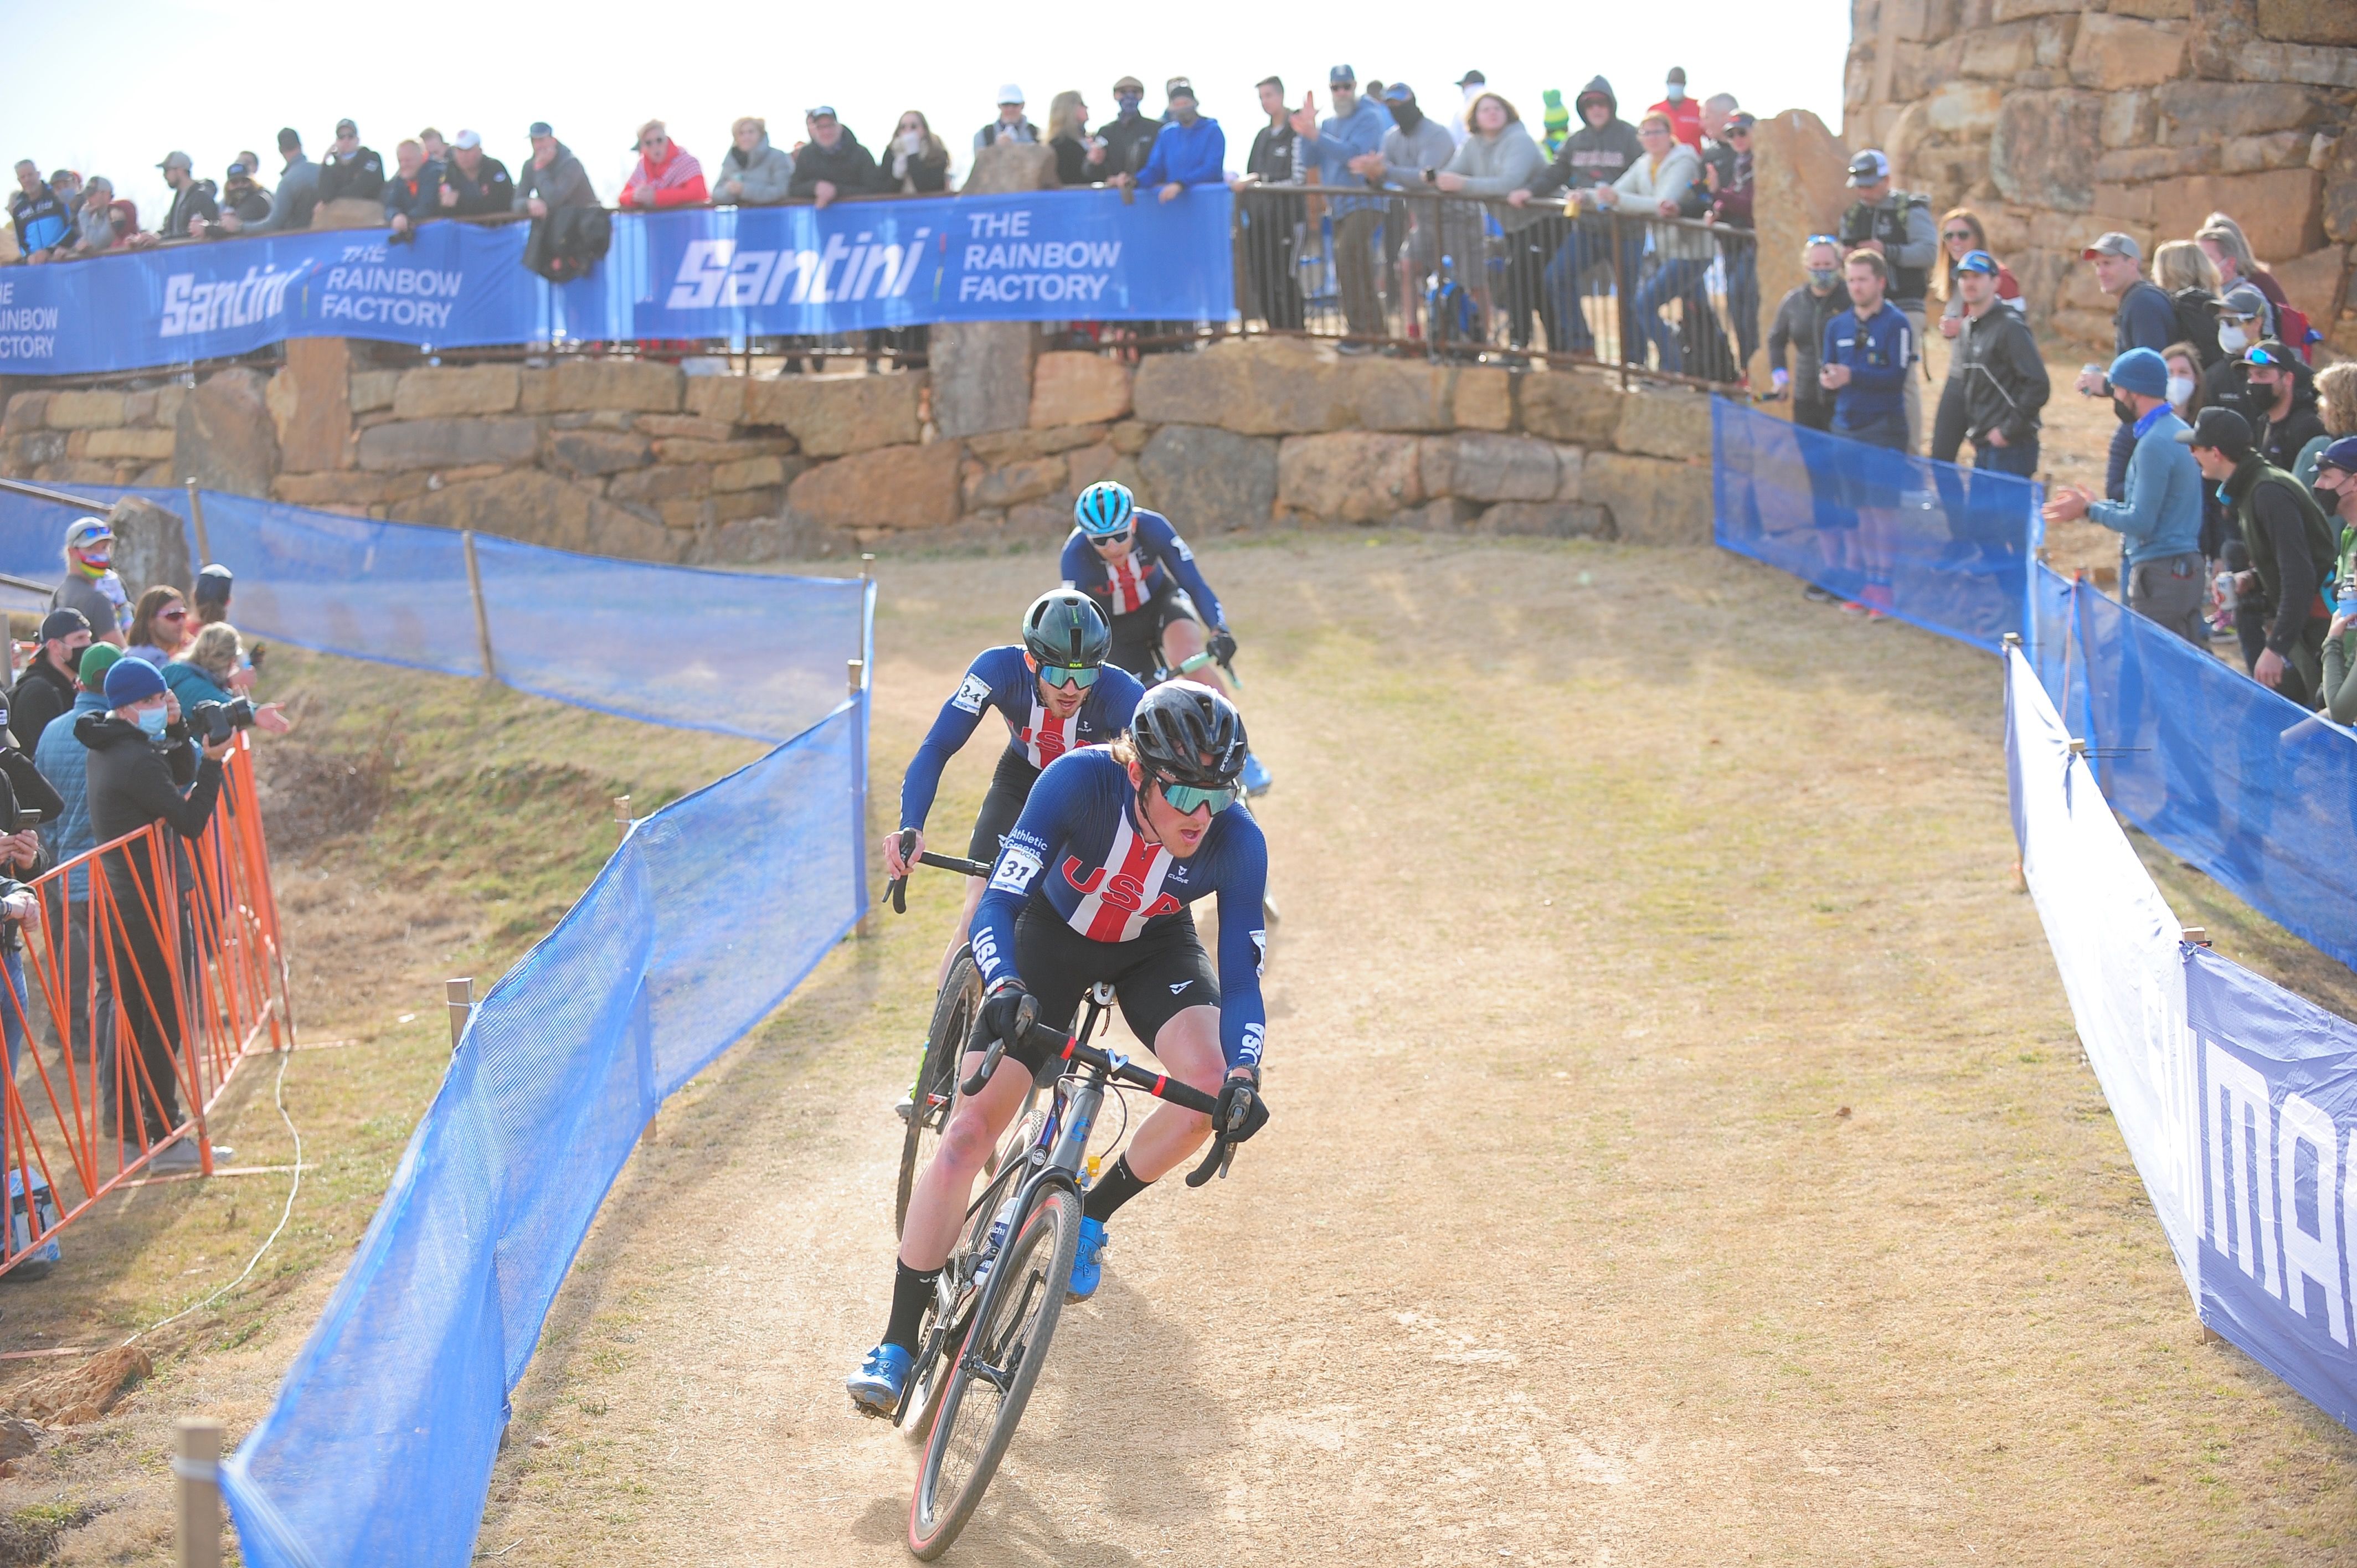 Part of the USA men's elite team race in a cyclo-cross event. 